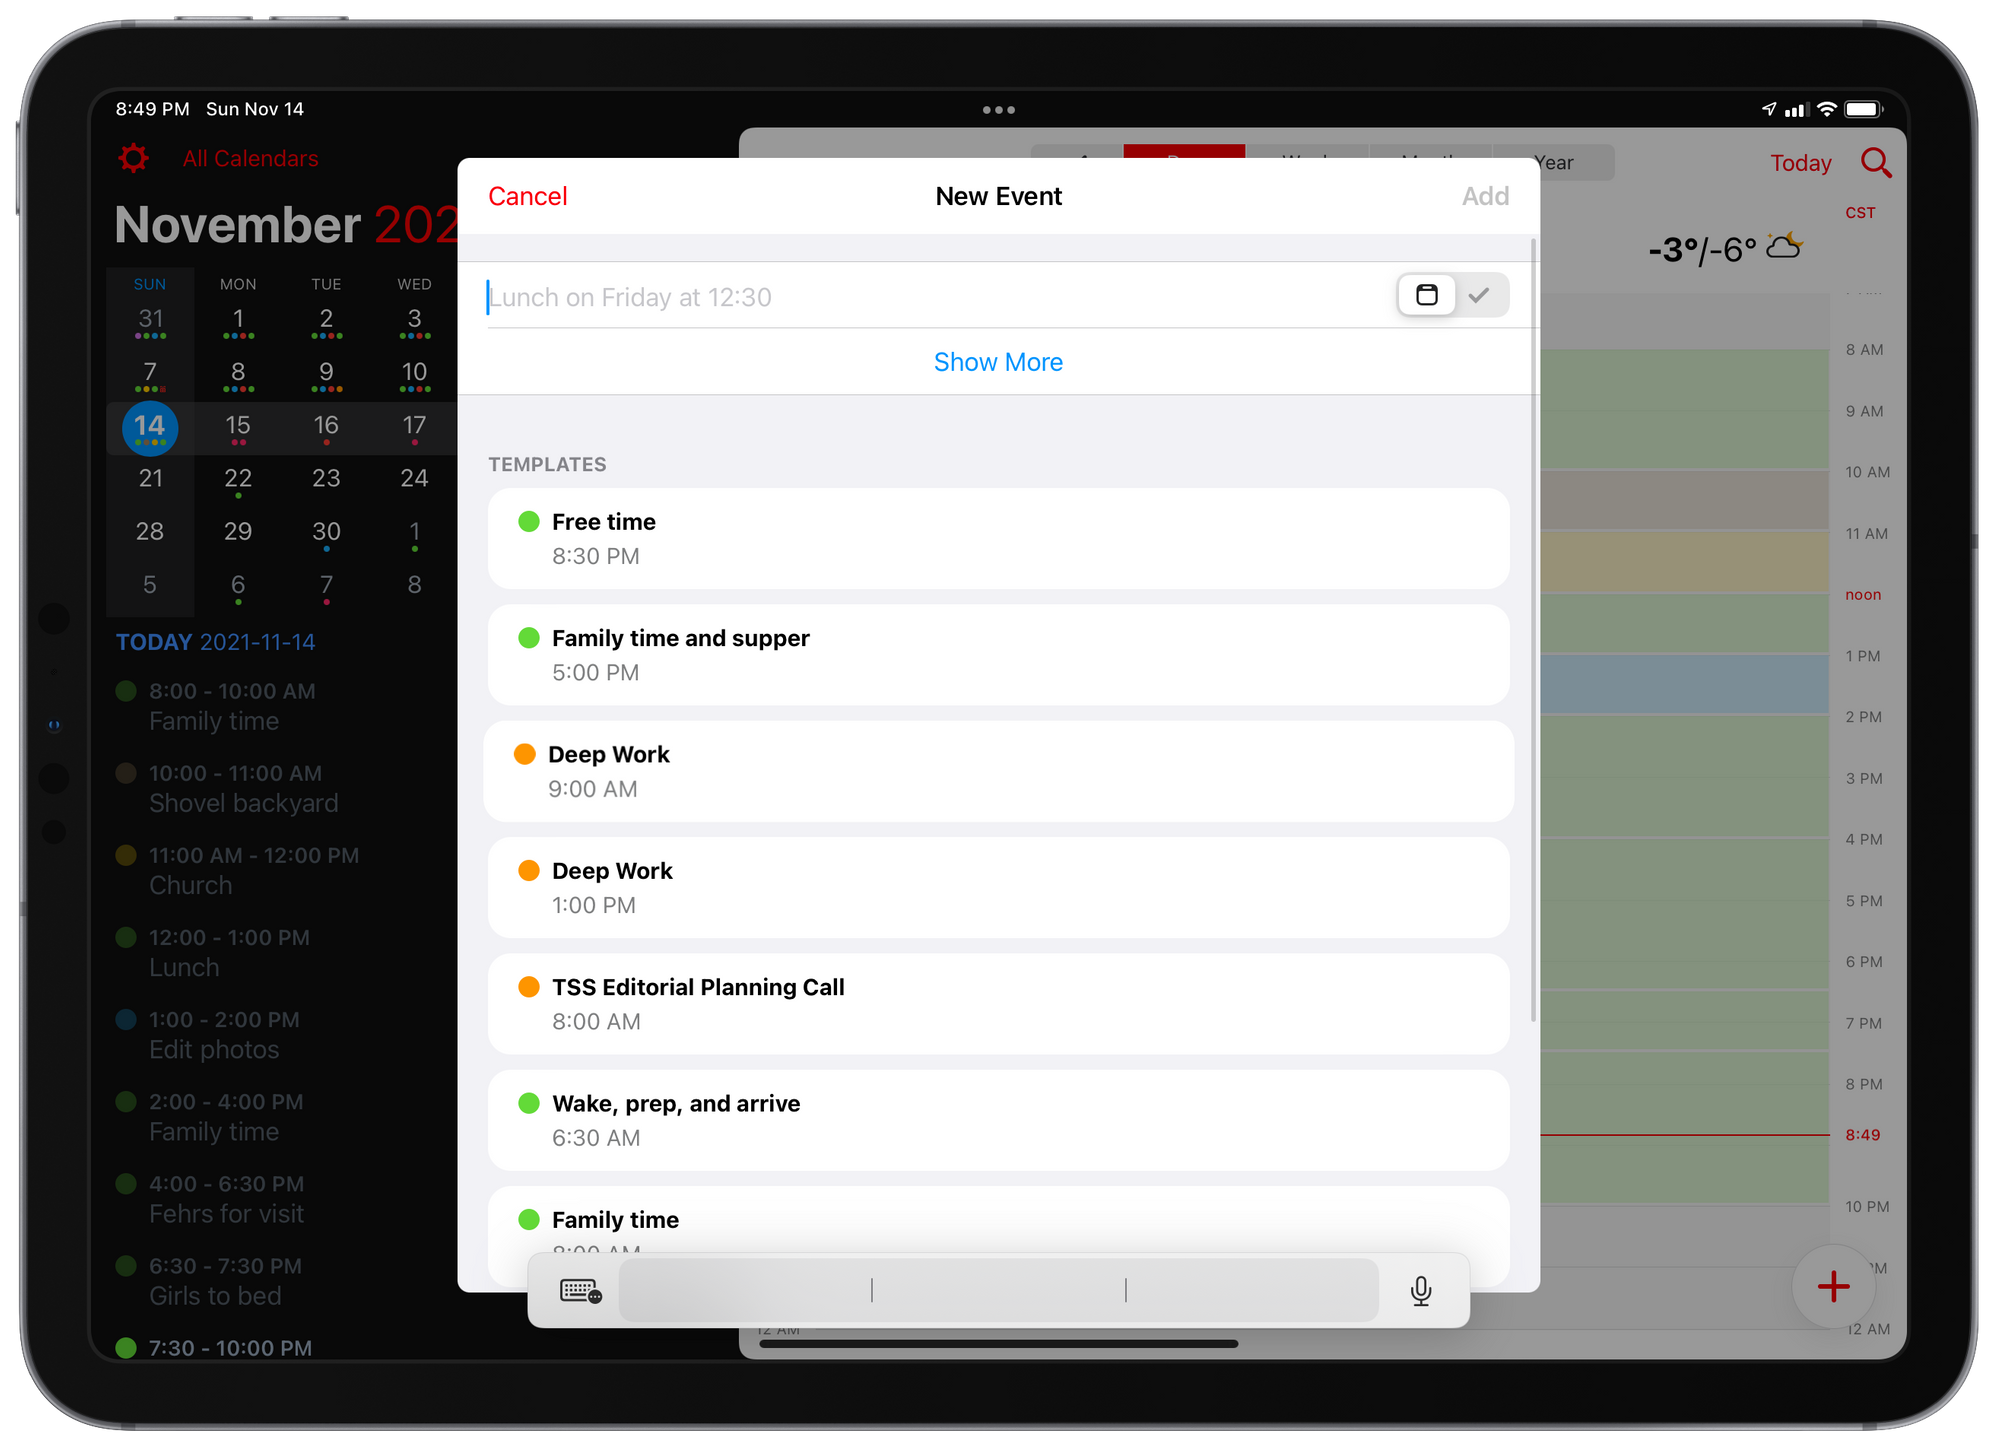 The template list on iPad is very handy for quickly adding common events to your calendar.